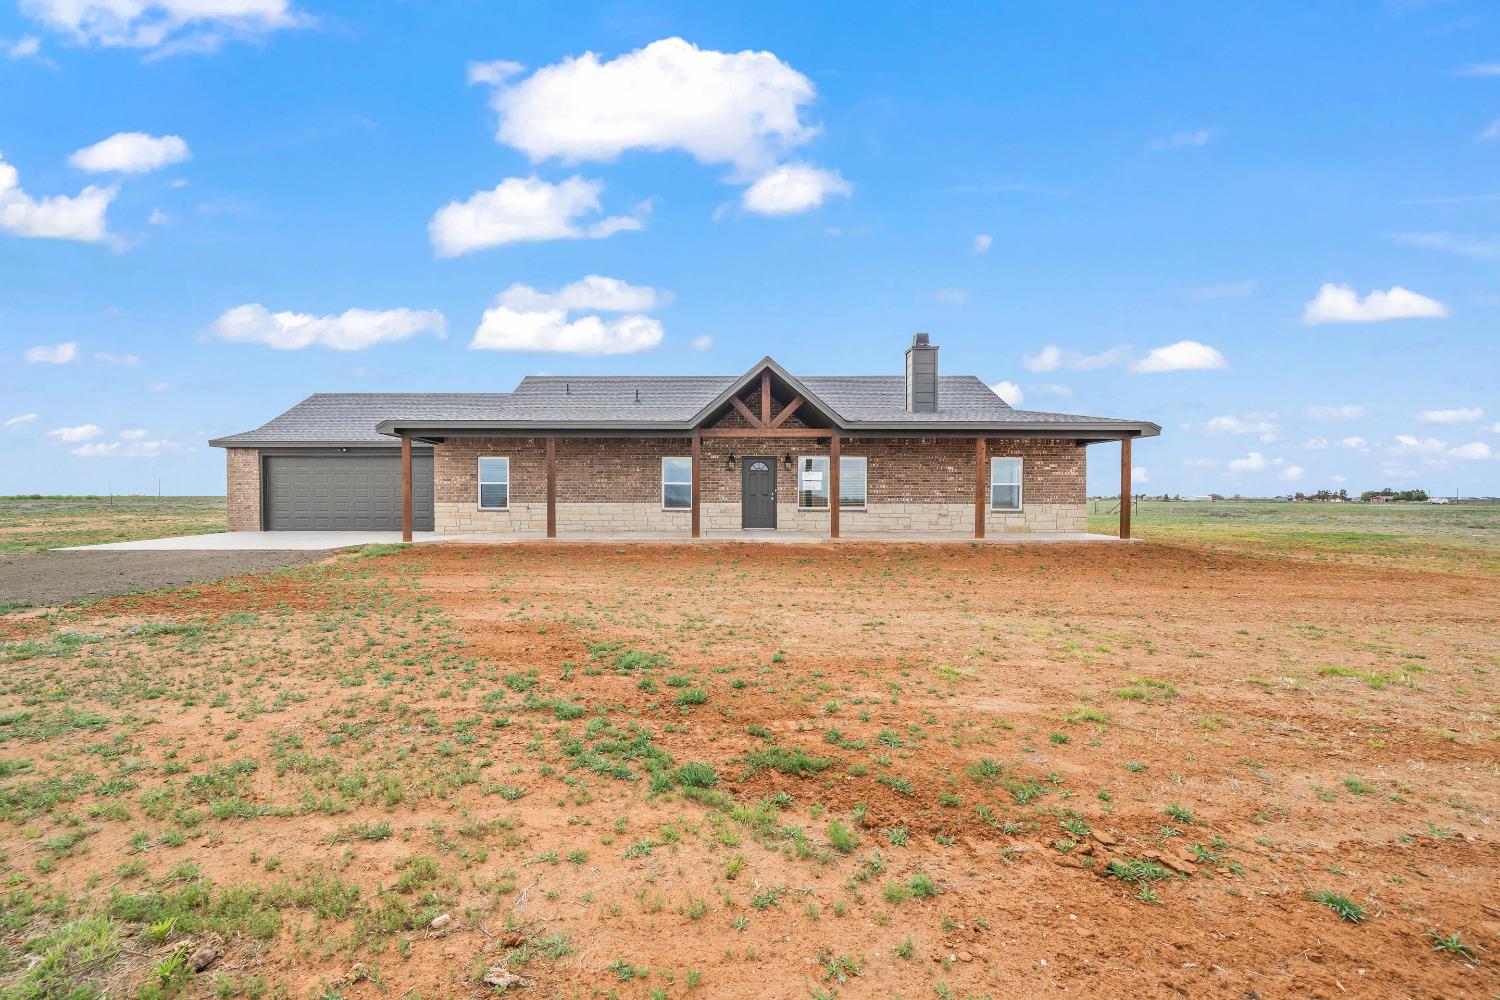 Come see this beautiful new construction home by Blue Creek Homes, LLC! Located in Prestigious Lubbock Cooper ISD, on 10.01 acres. Deed restrictions allow horses. Four bedrooms, Two Bathrooms. This home offers an isolated master suite with walk in shower and Separate tub. Separate Vanities and a walk in closet in the master. Spacious separate laundry room. Granite countertops throughout. New appliances including: Range, microwave, and dishwasher. Vaulted ceiling in living, with fireplace. Spacious bedrooms and closets throughout. Two car Garage with Utility closet. Perimeter barbed wire fence around the ten acres.  No City Taxes! Don't miss out!